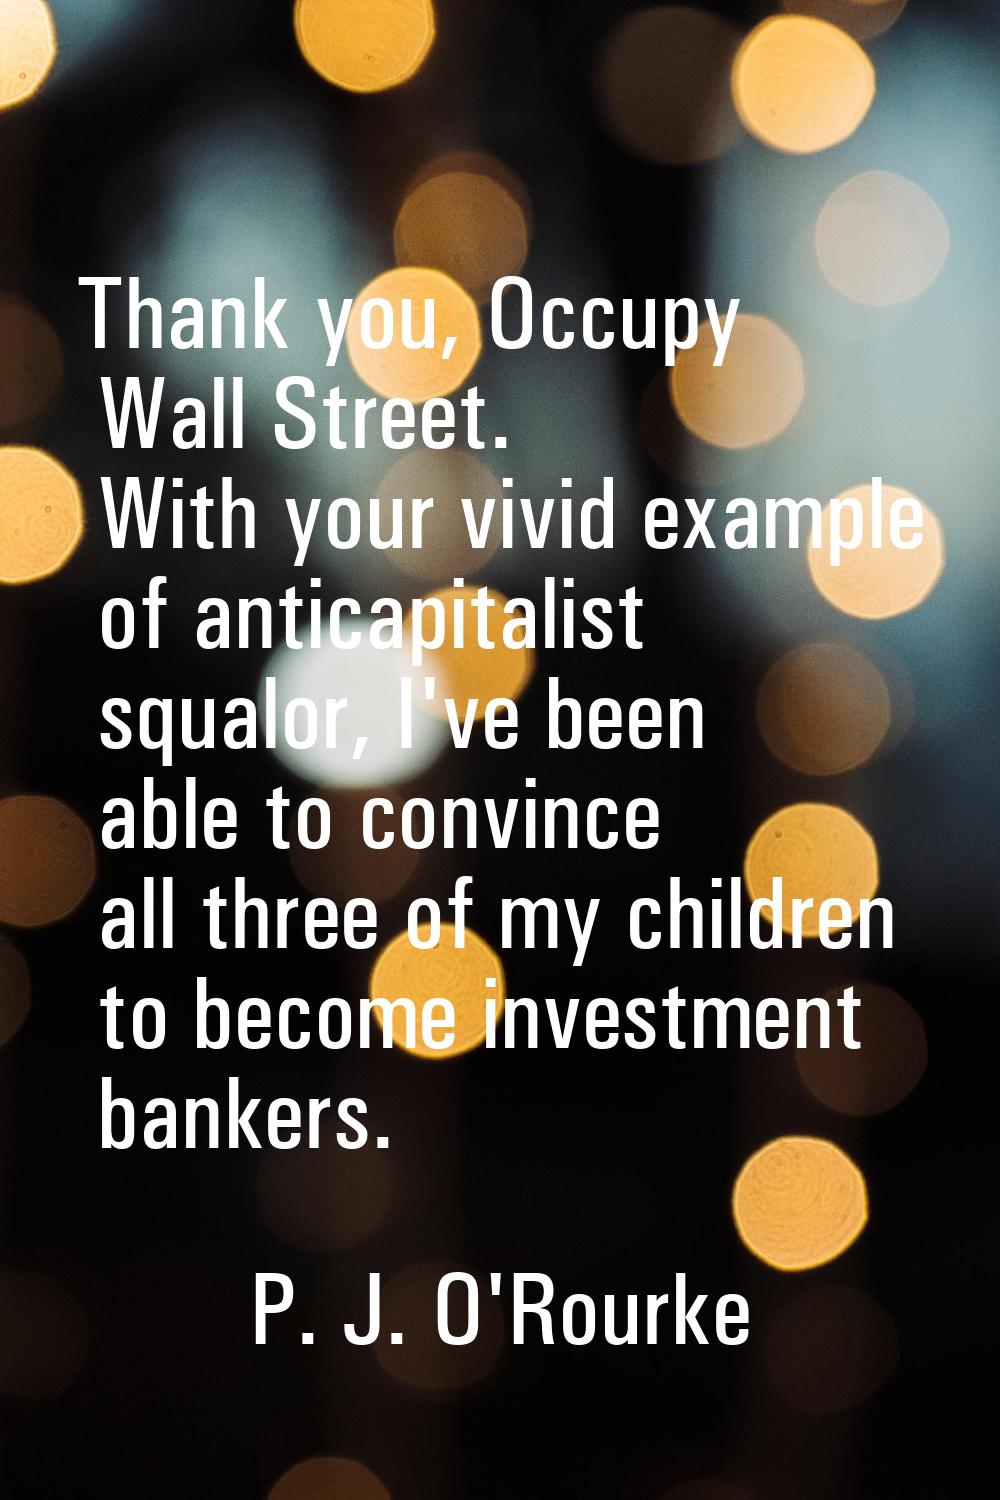 Thank you, Occupy Wall Street. With your vivid example of anticapitalist squalor, I've been able to